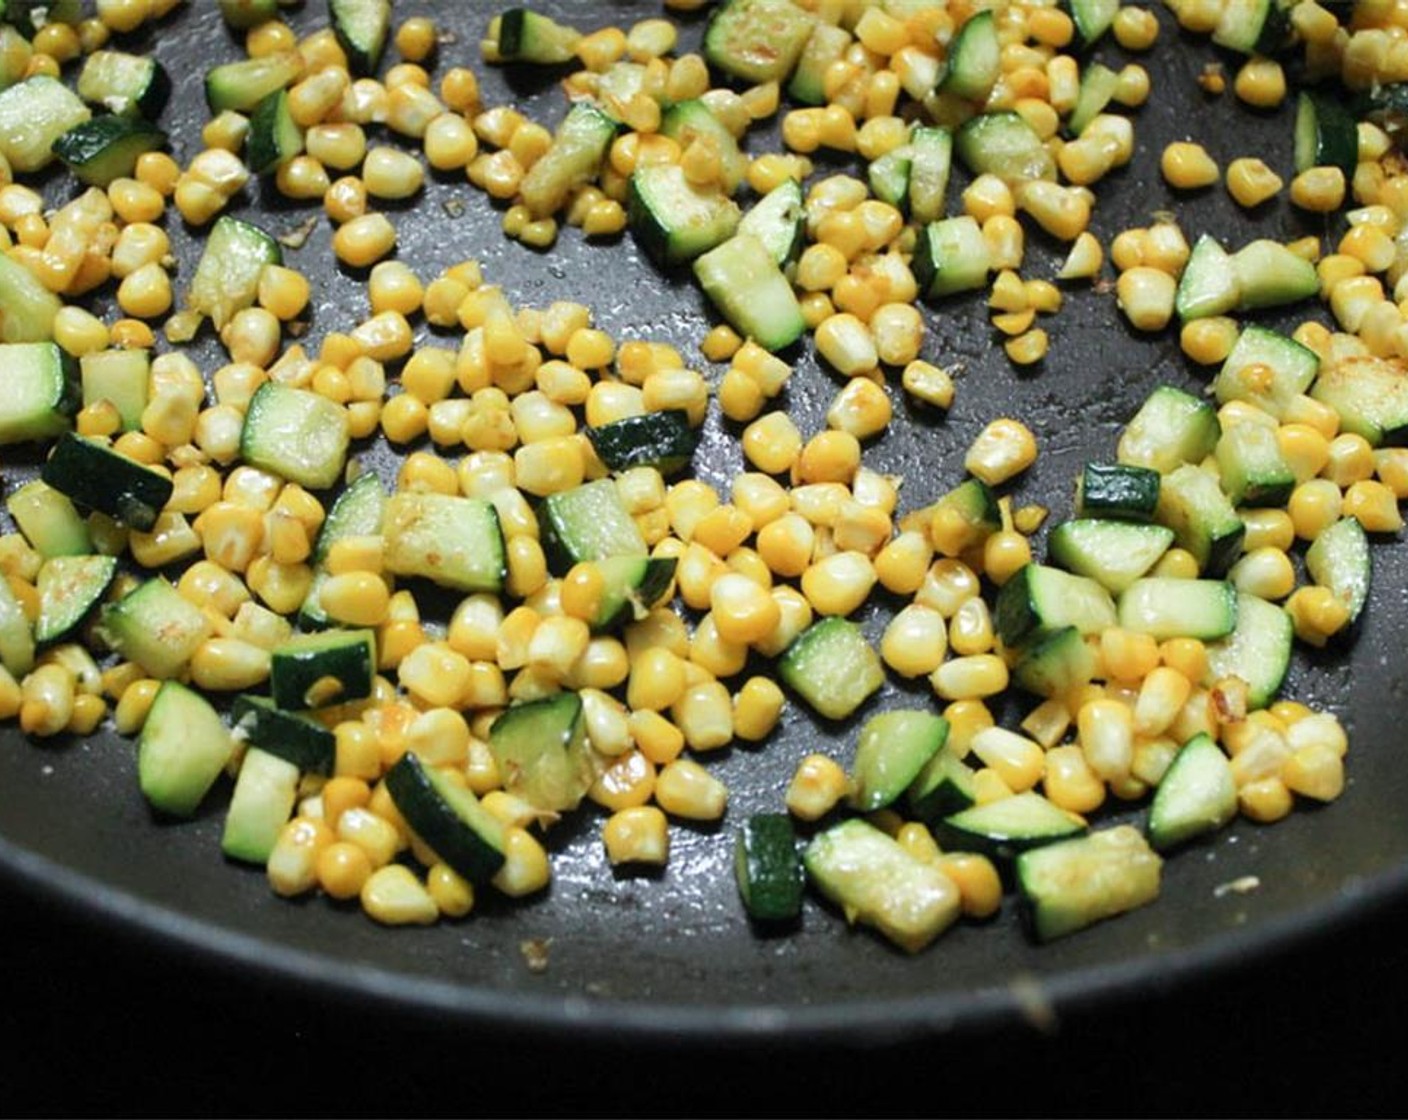 step 2 Heat a tablespoon of Olive Oil (1 Tbsp) in a large skillet. When hot, add the Corn (1 ear), Zucchini (1) and Salt (to taste). Sauté for 8 minutes until tender and lightly browned.